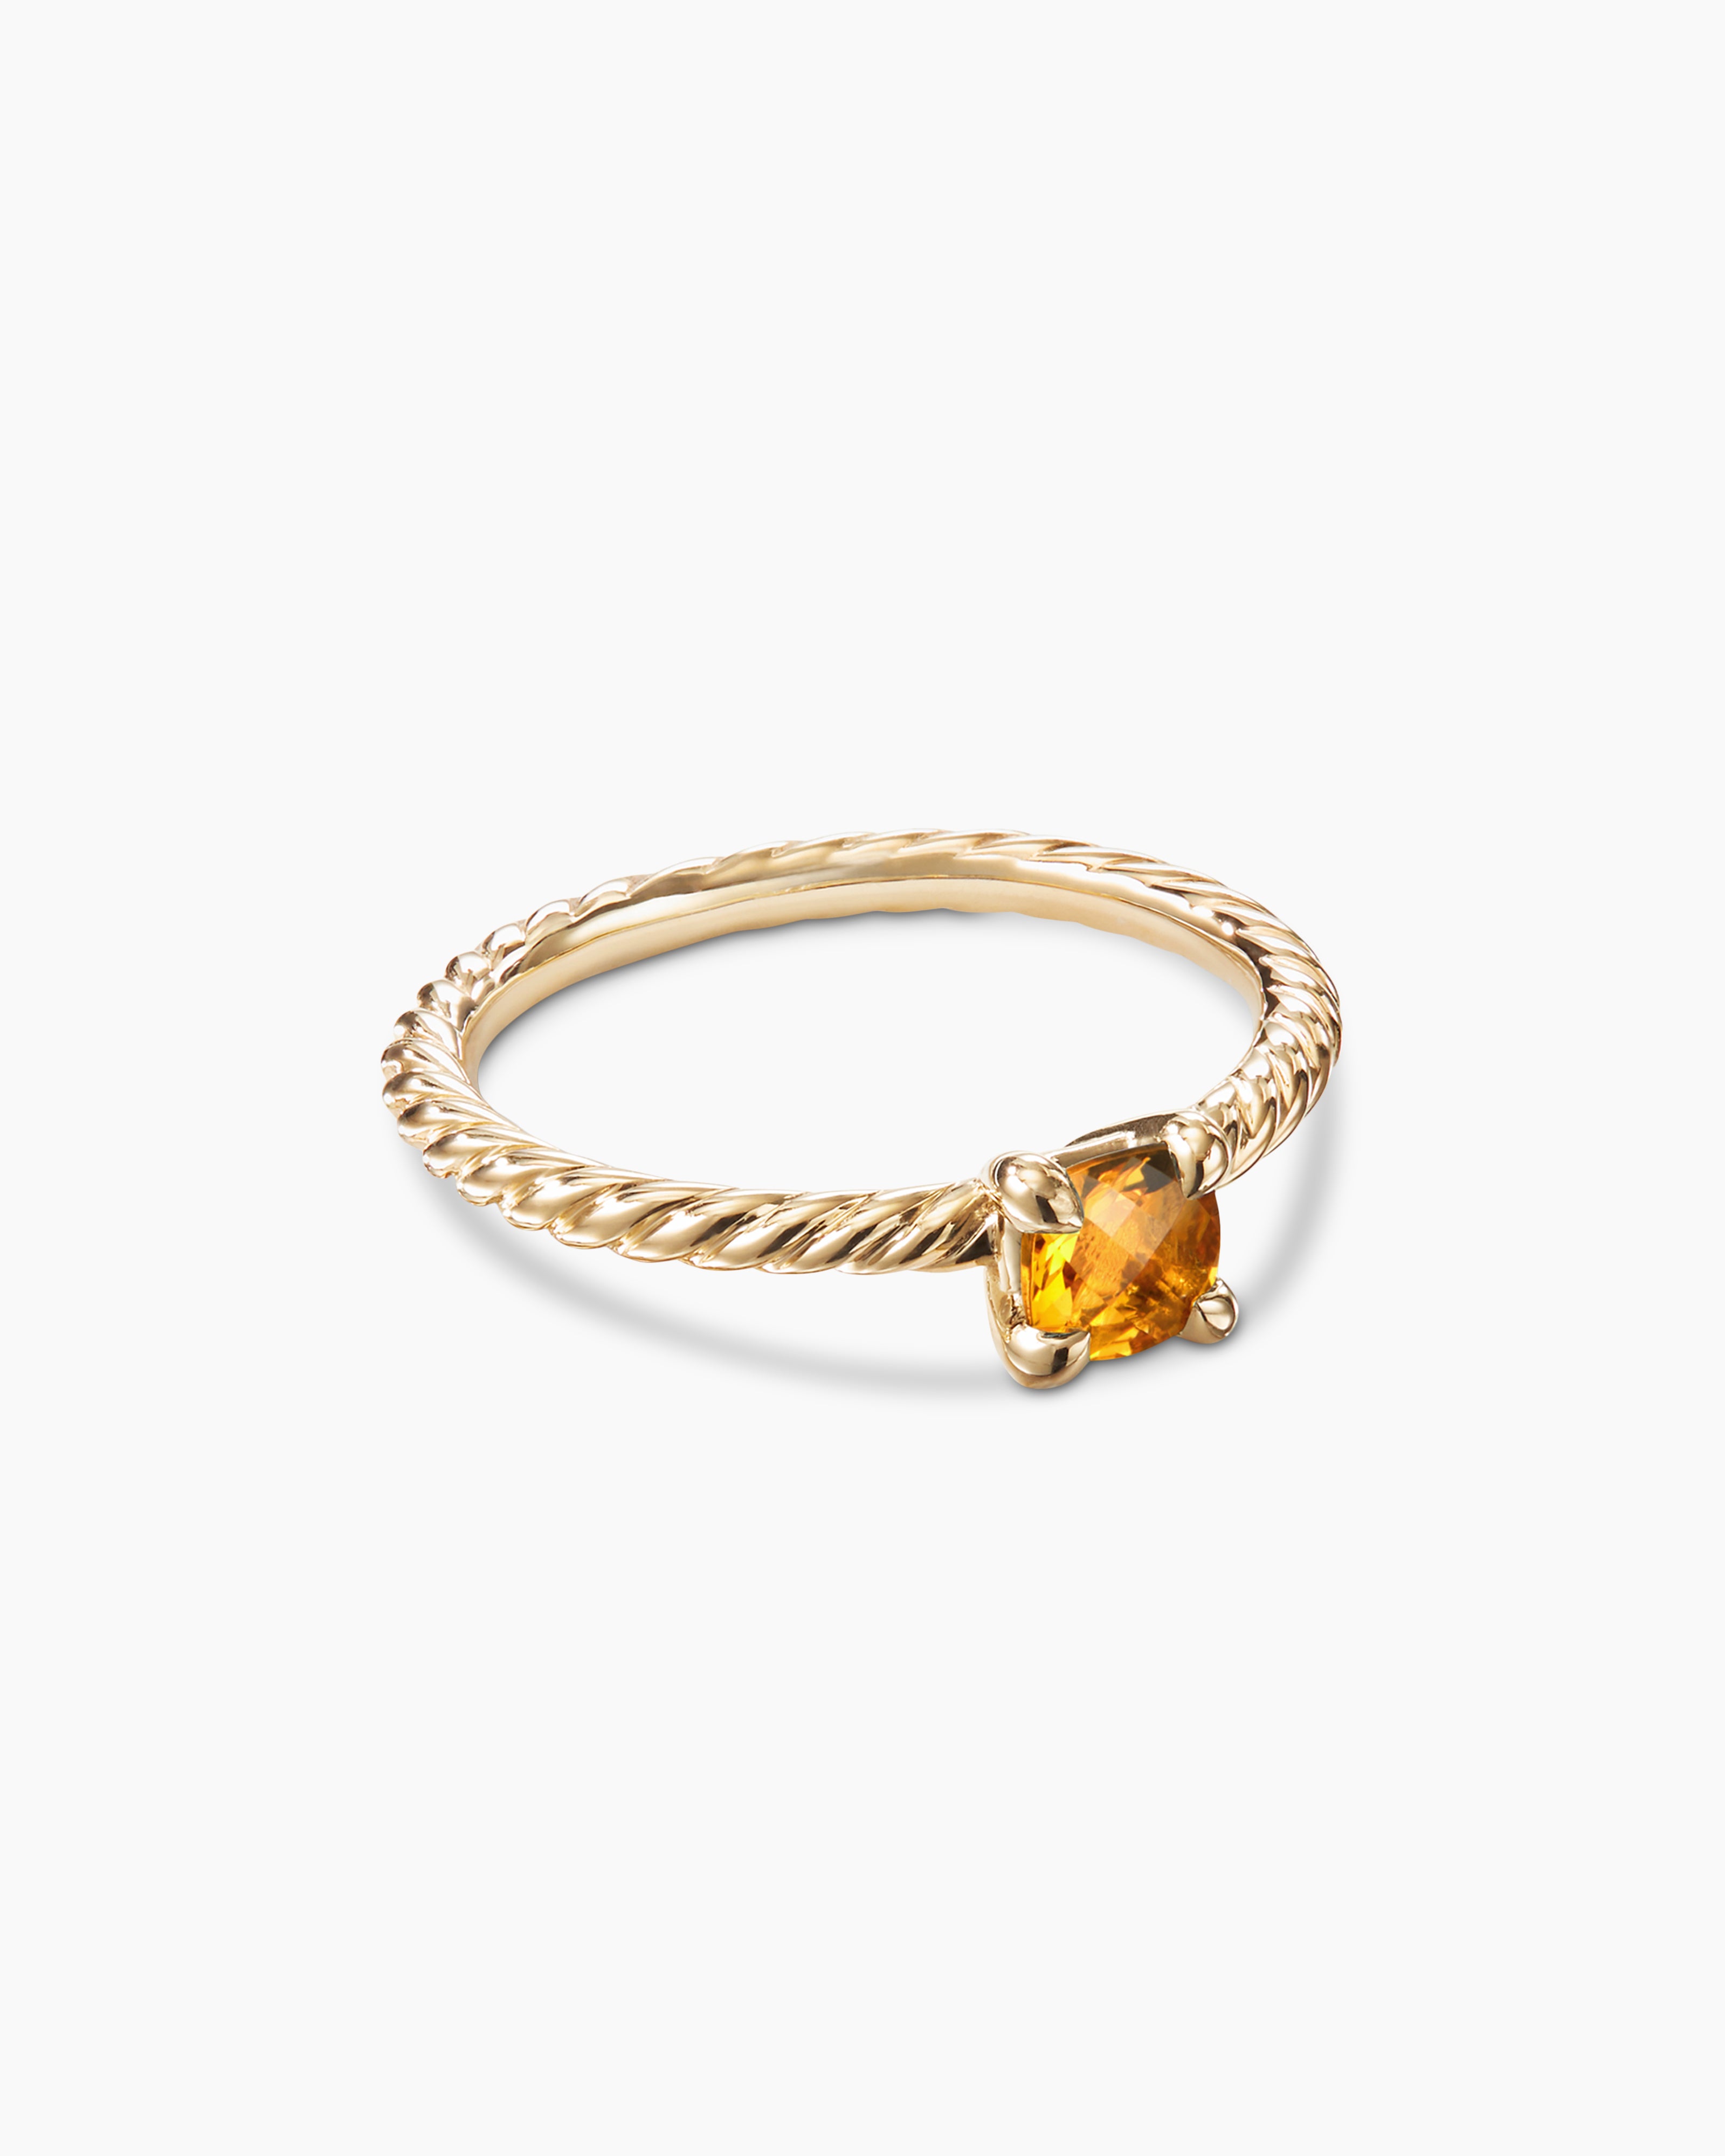 Albion Kids Ring in Sterling Silver with Diamonds, 4mm | David Yurman